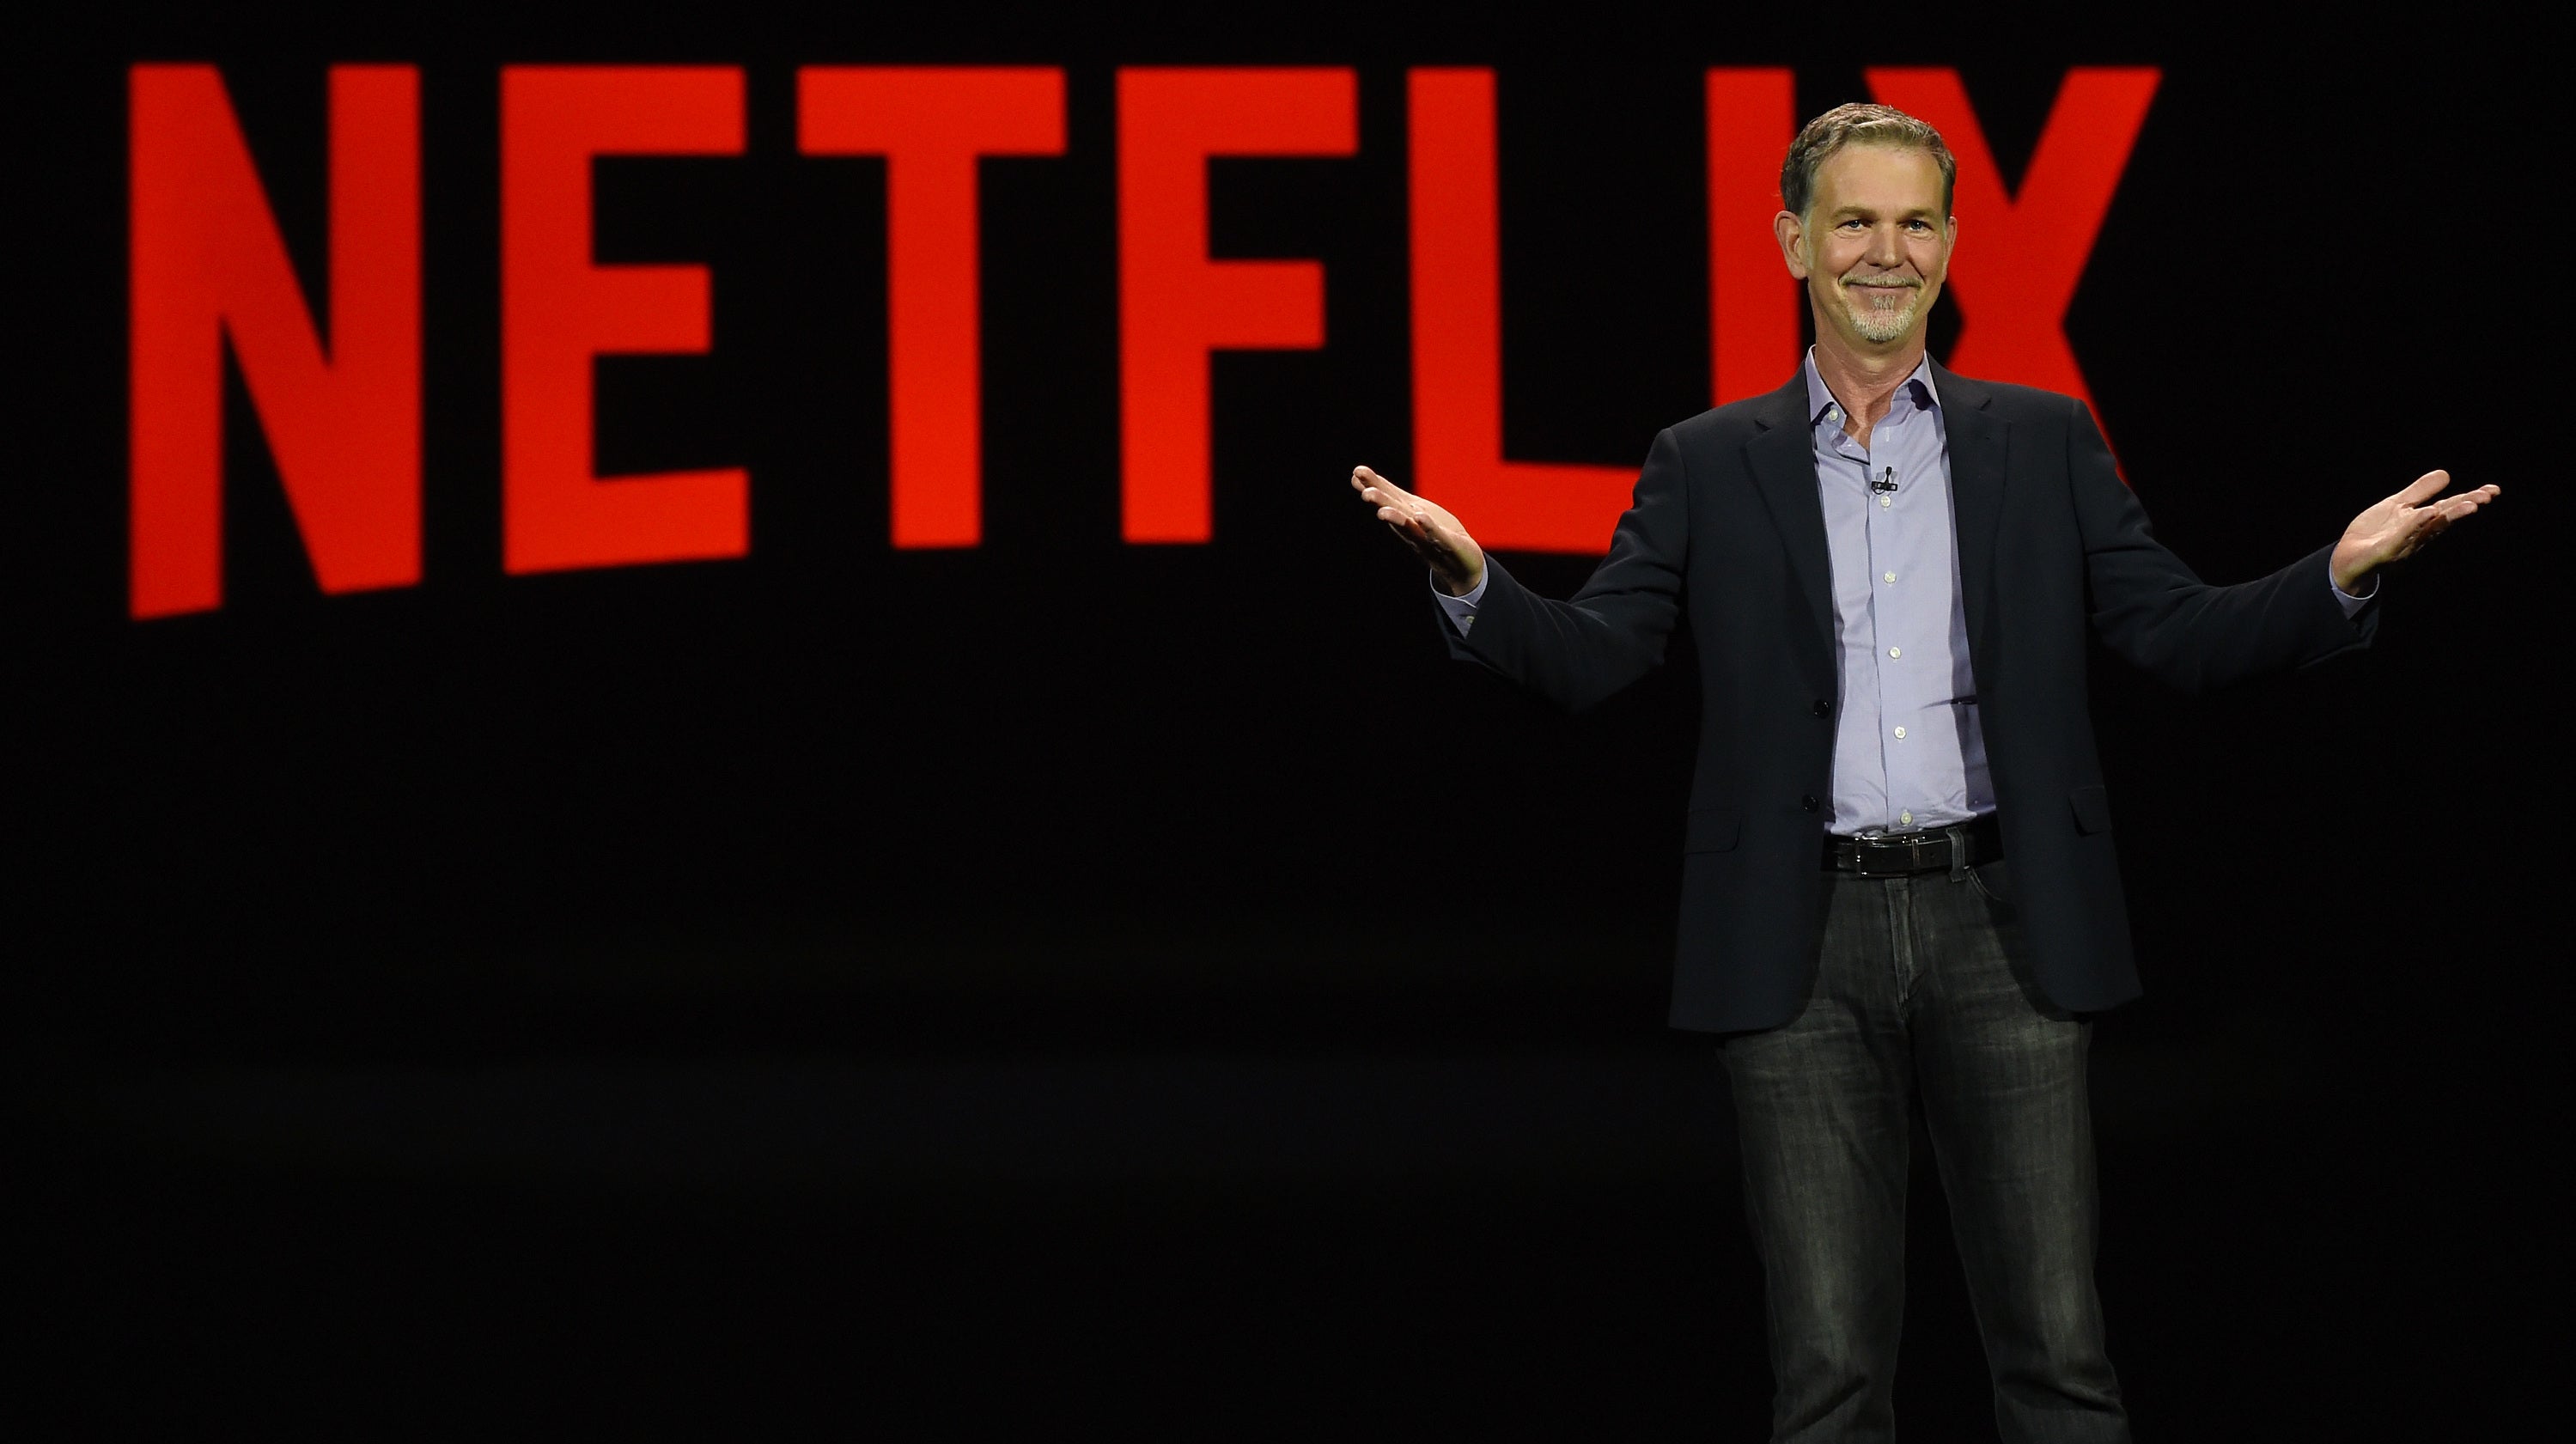 Working At Netflix Sounds Like Hell